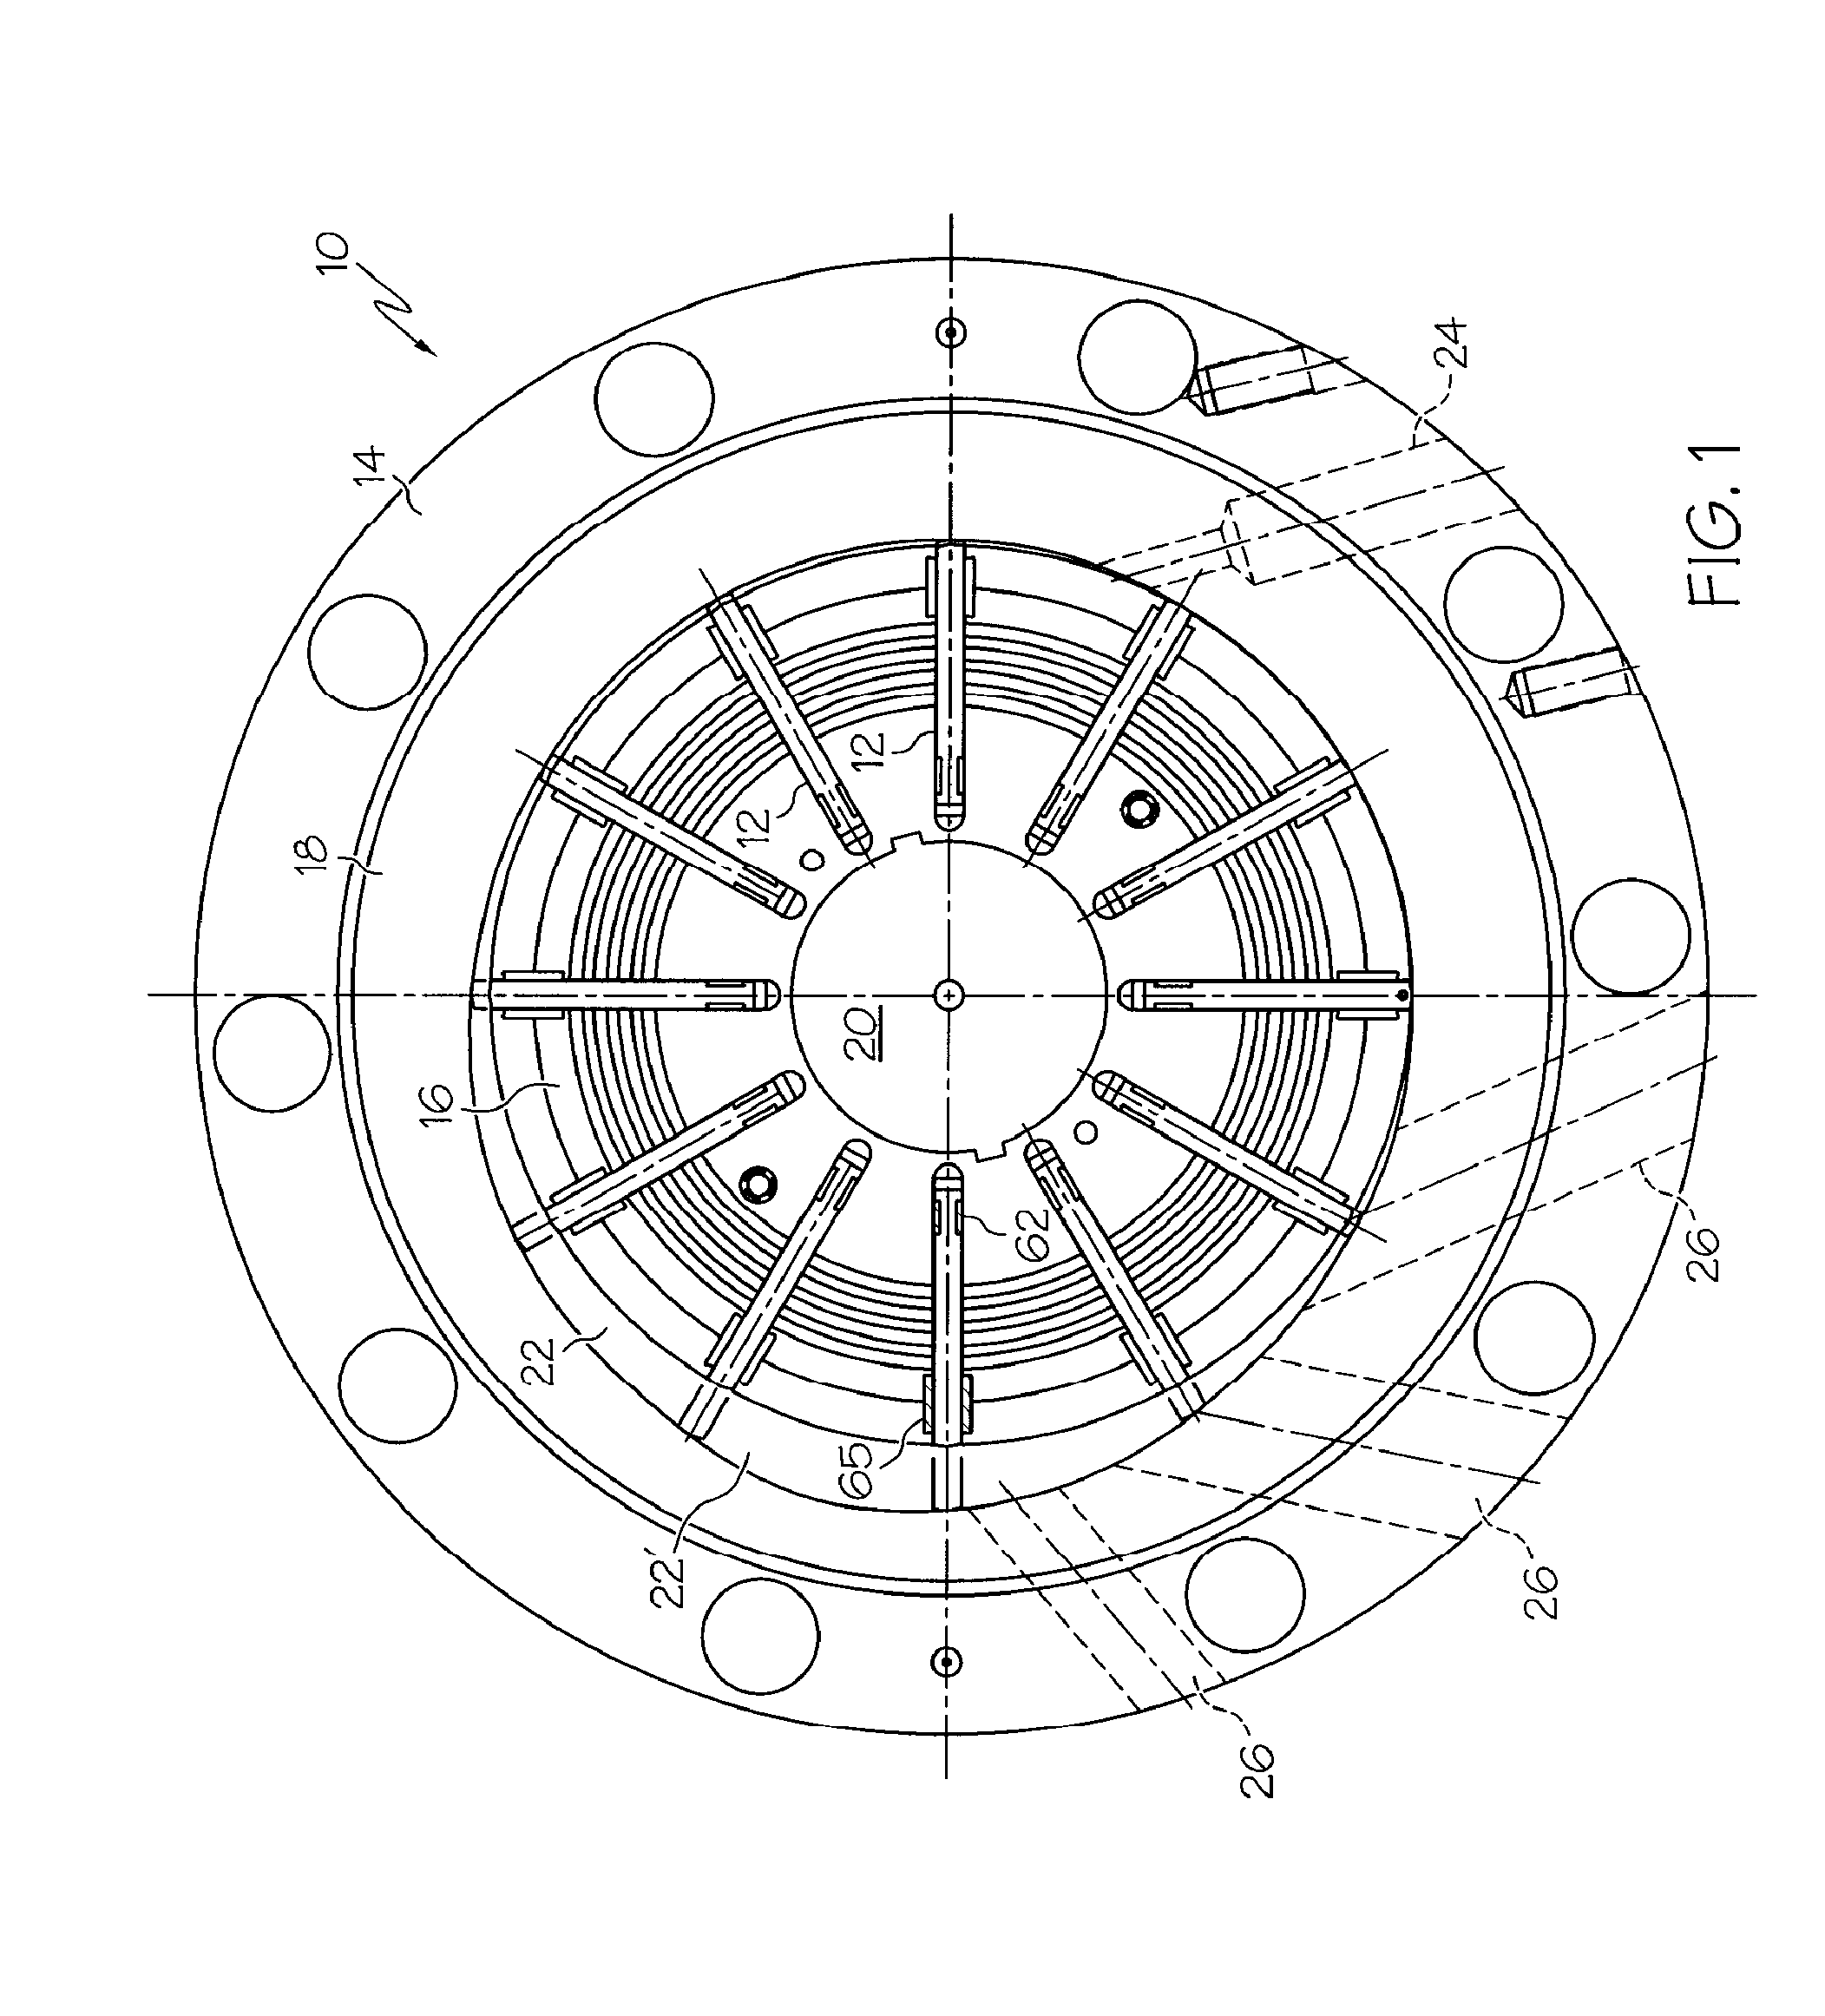 Sliding Vane Compression and Expansion Device